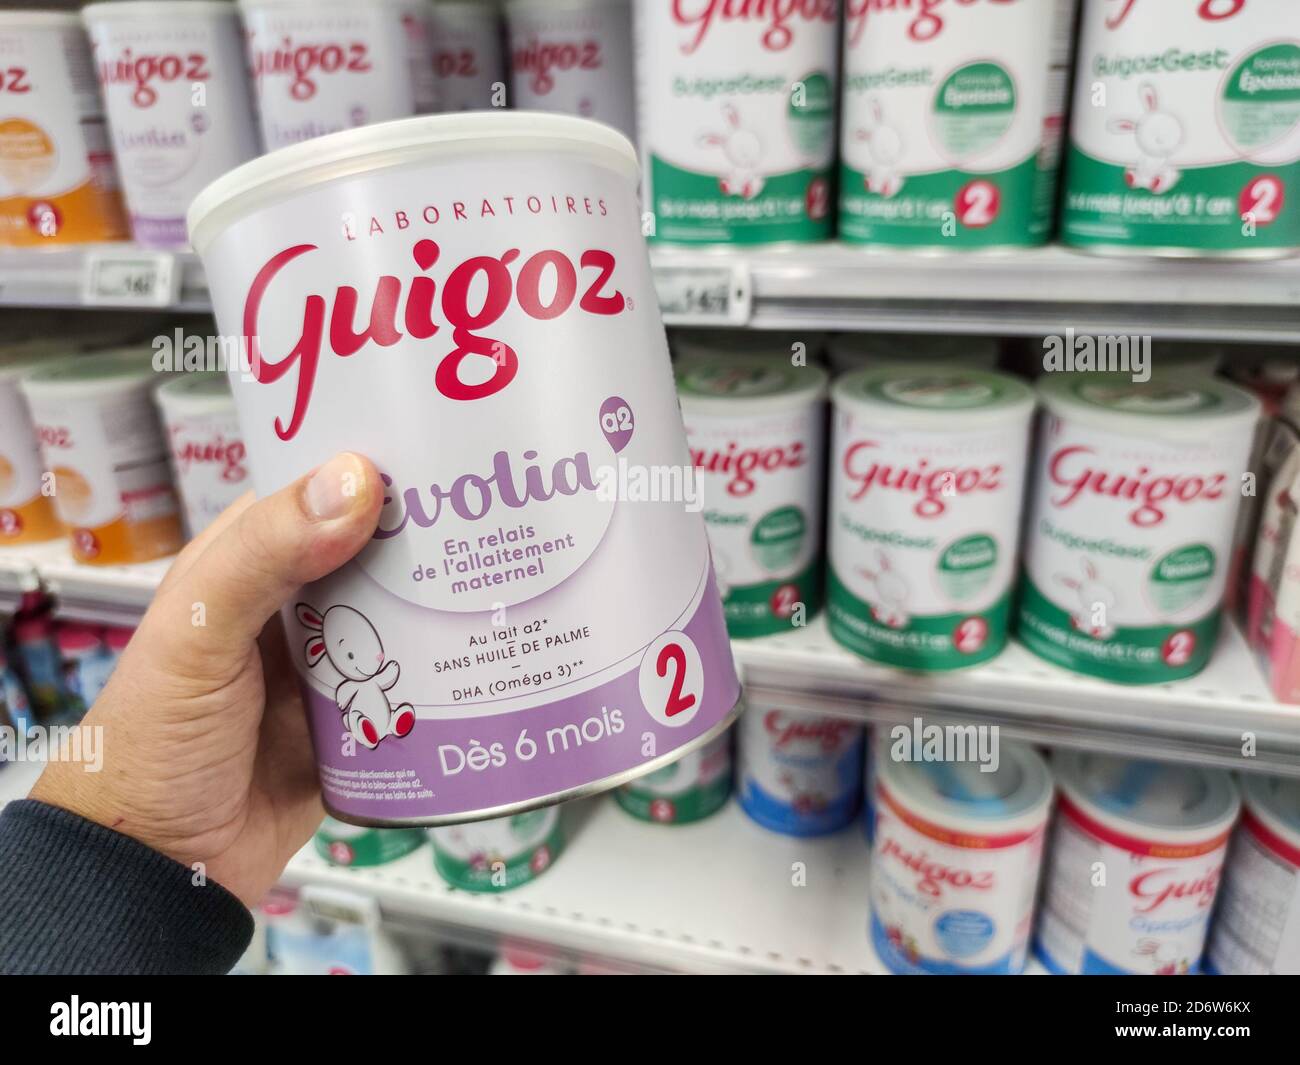 Puilboreau, France - October 14, 2020:A consumer chooses a box of Guigoz  brand baby milk from the baby food section of a supermarket Stock Photo -  Alamy